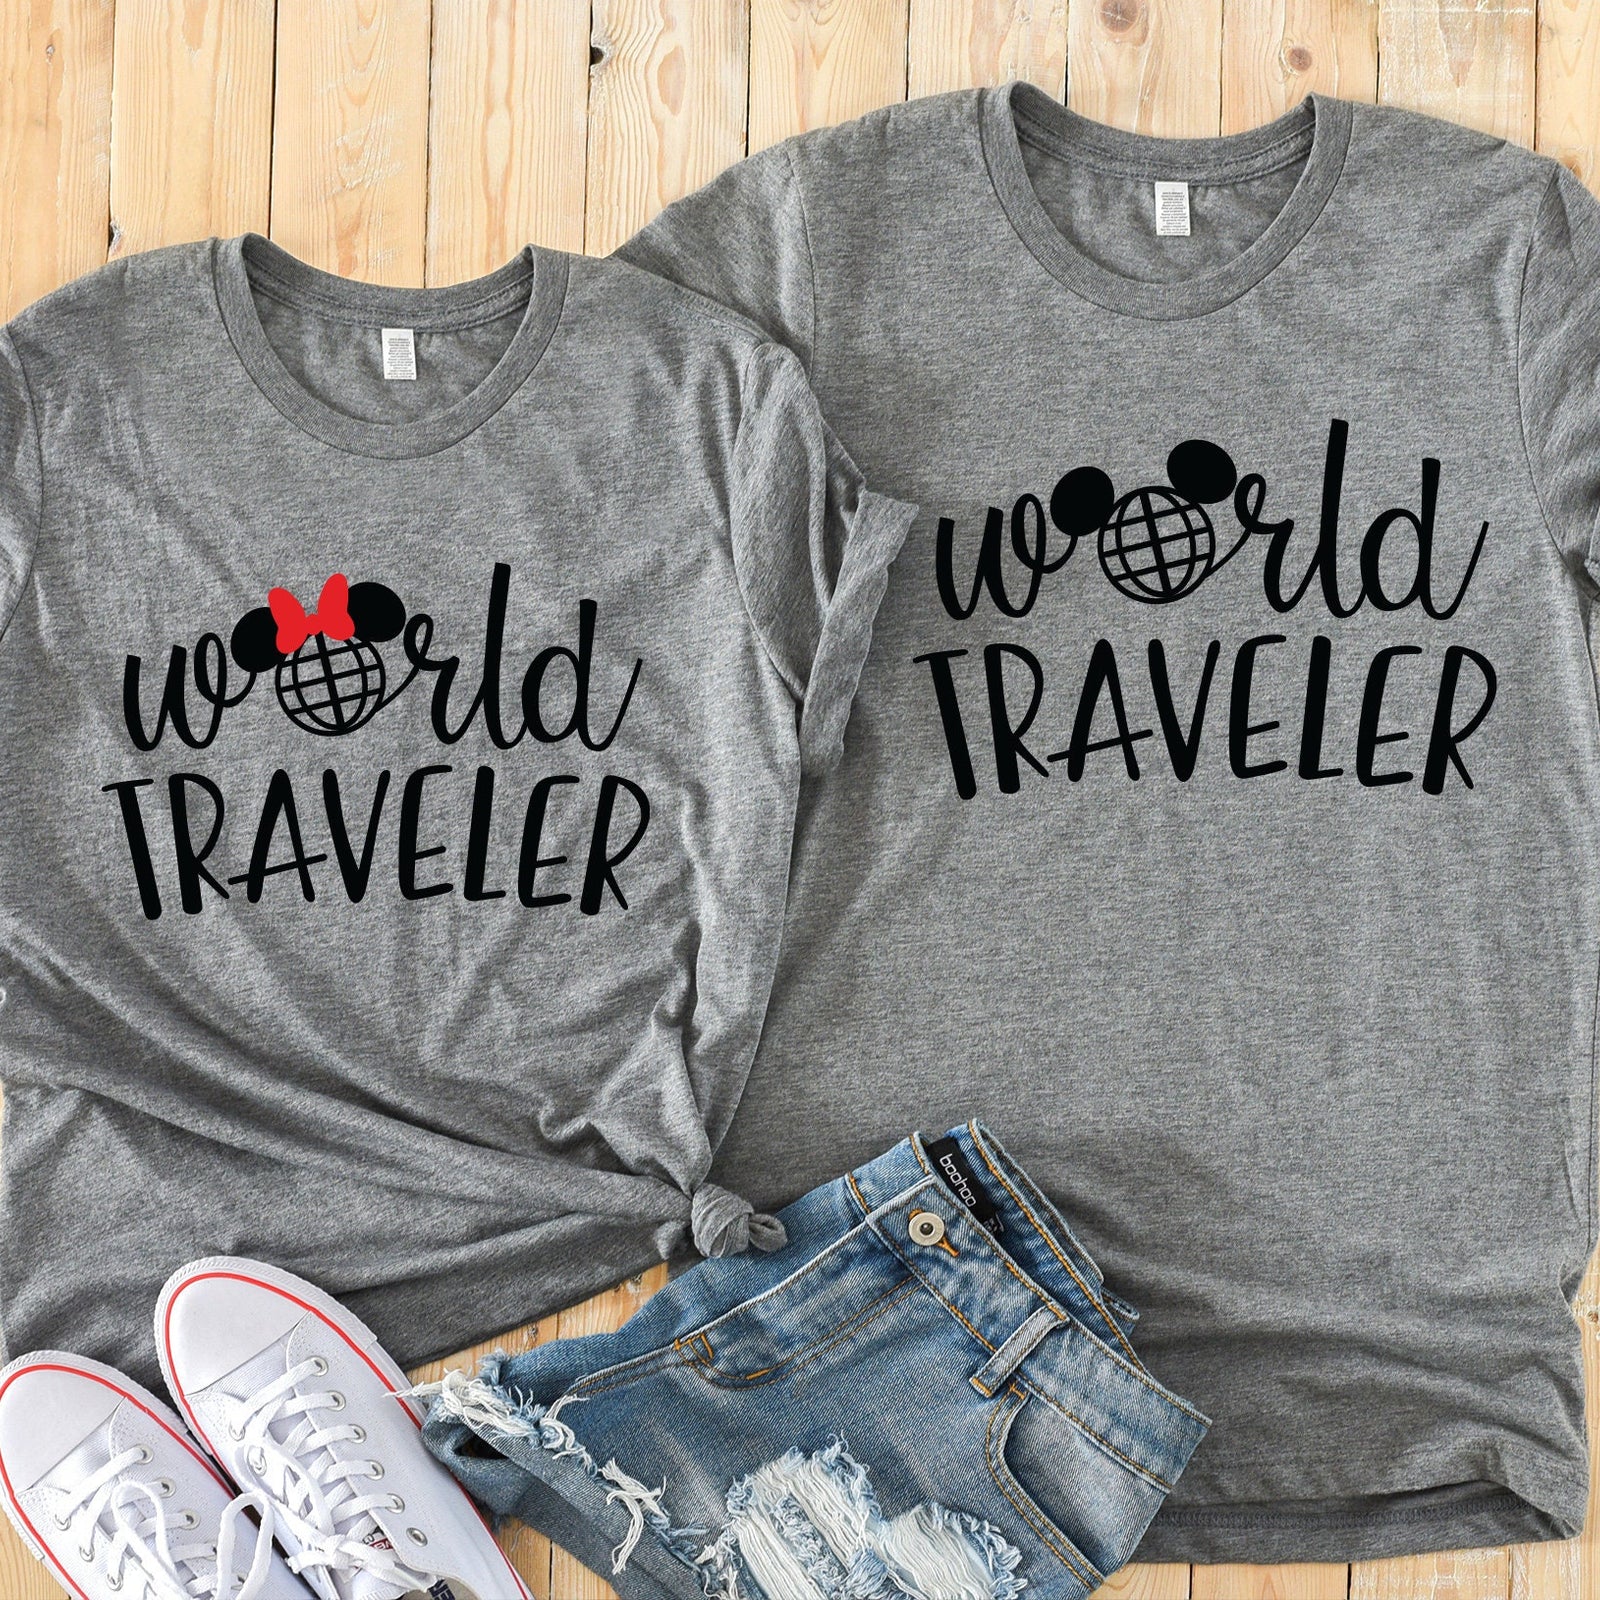 World Traveler Minnie and Mickey Mouse Matching Shirts - Disney Couples Shirt -Epcot World Showcase - Food and Wine Festival